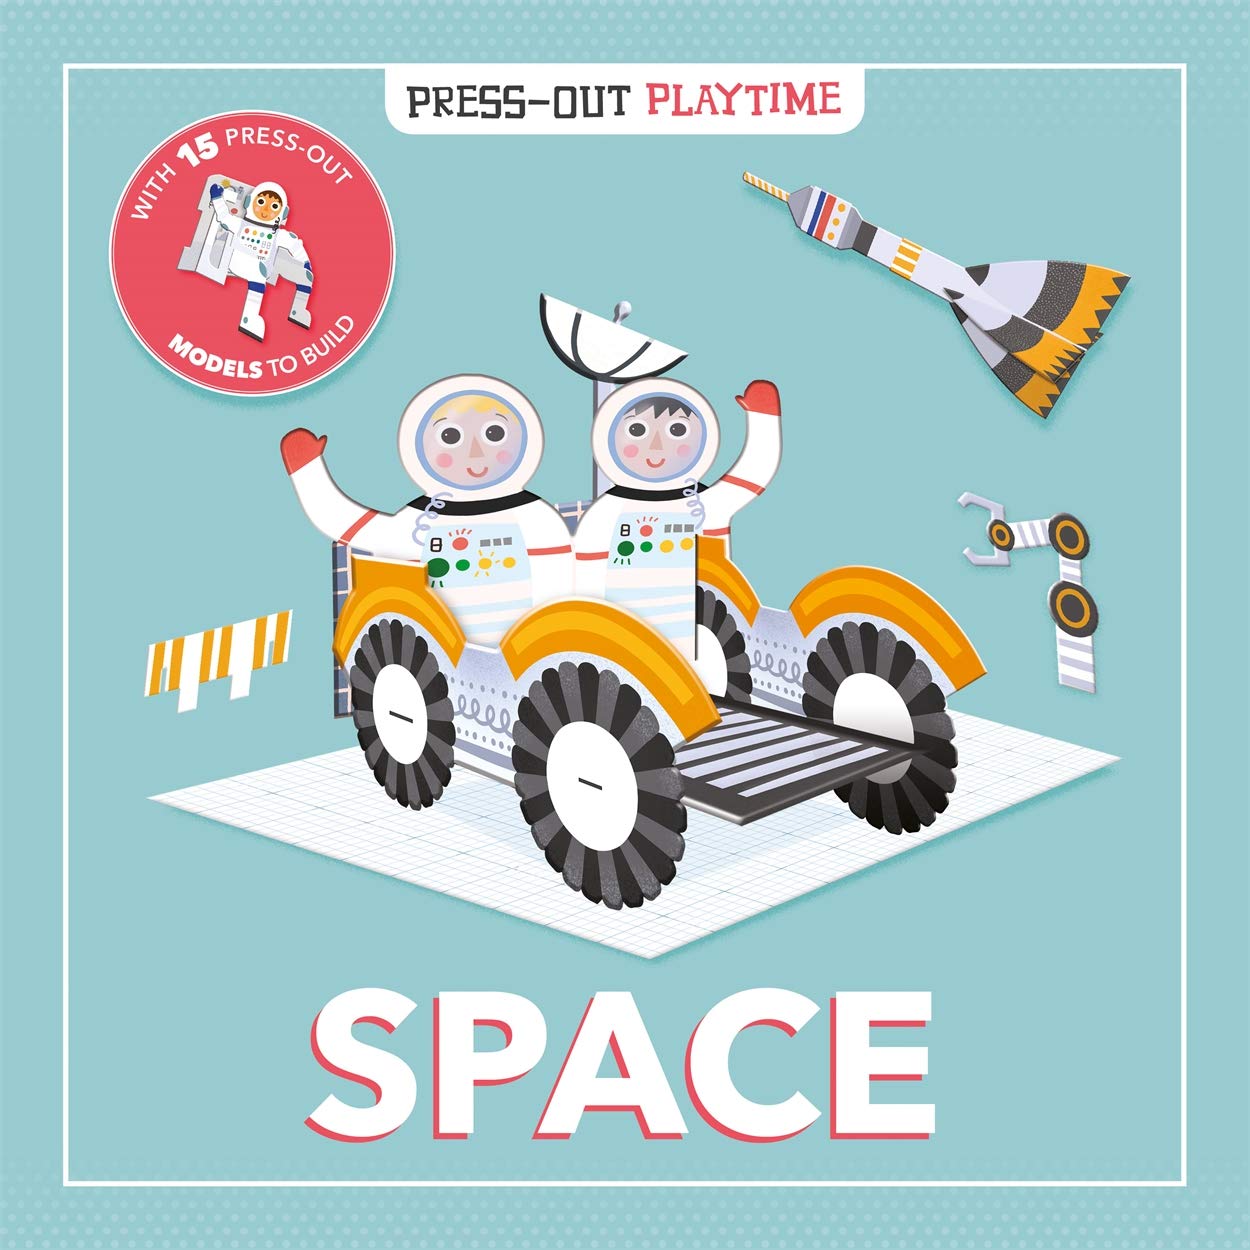 Press-Out Playtime Space